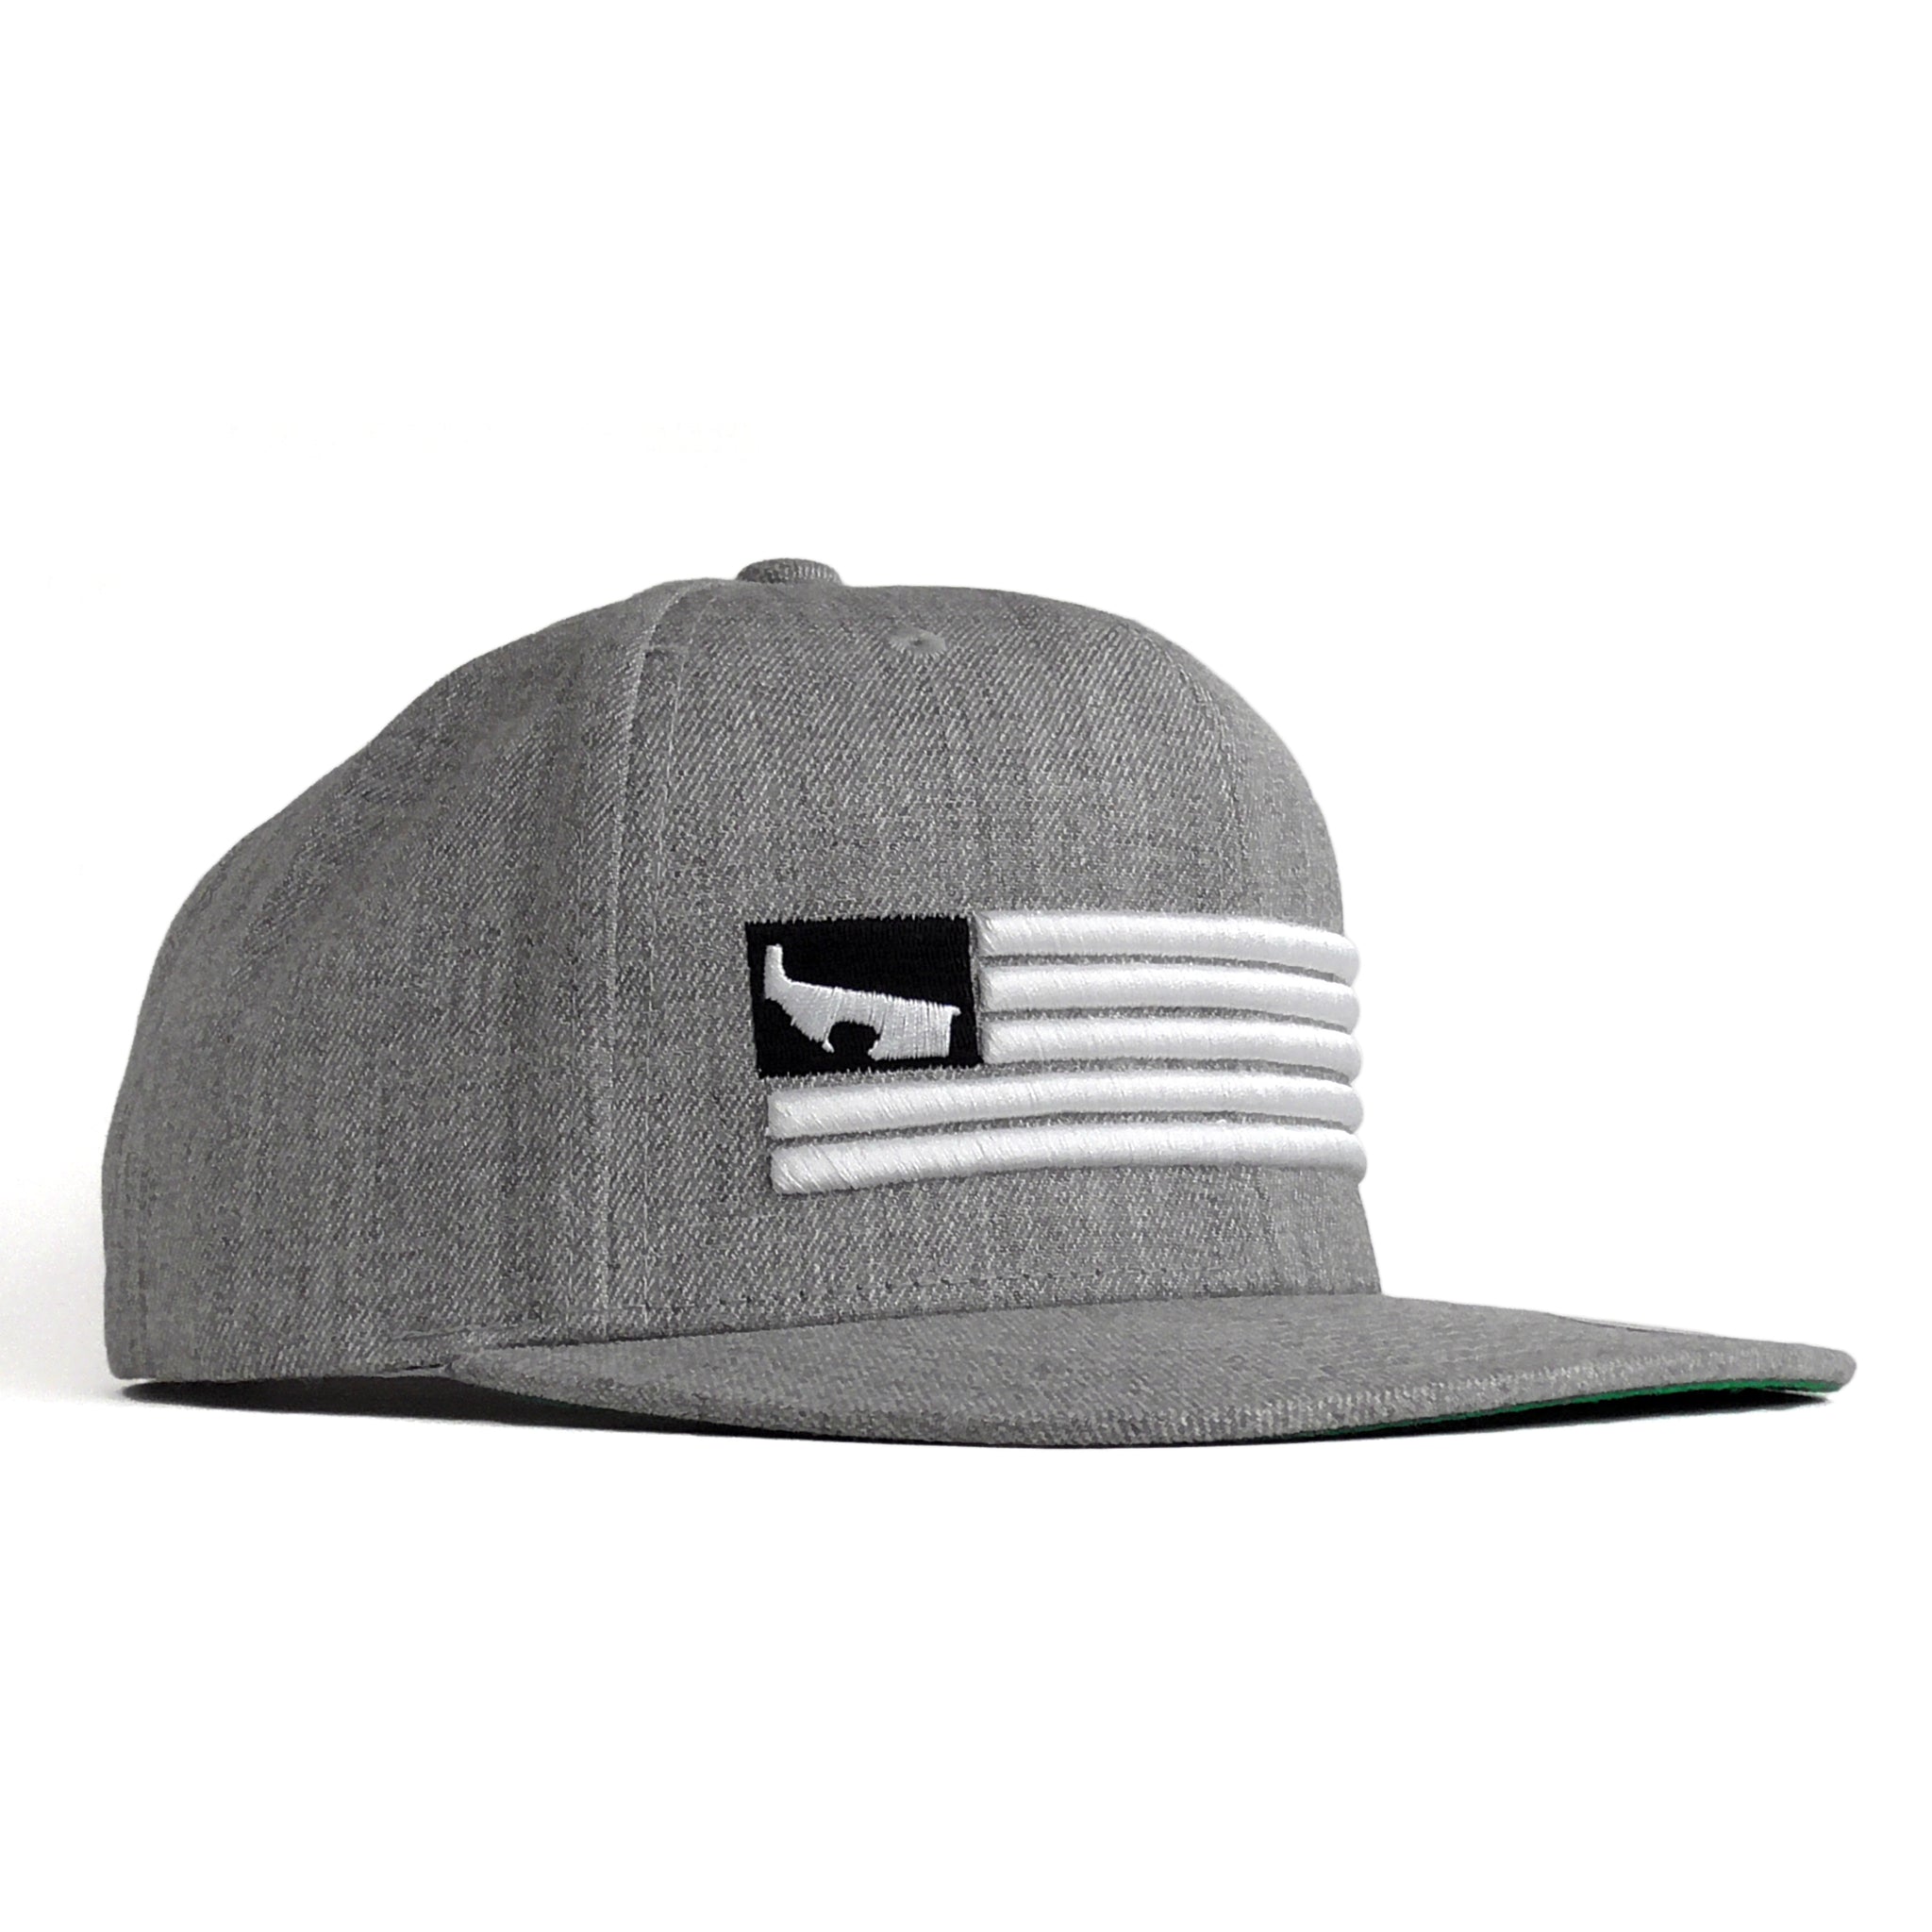 Receivers and Stripes Hat